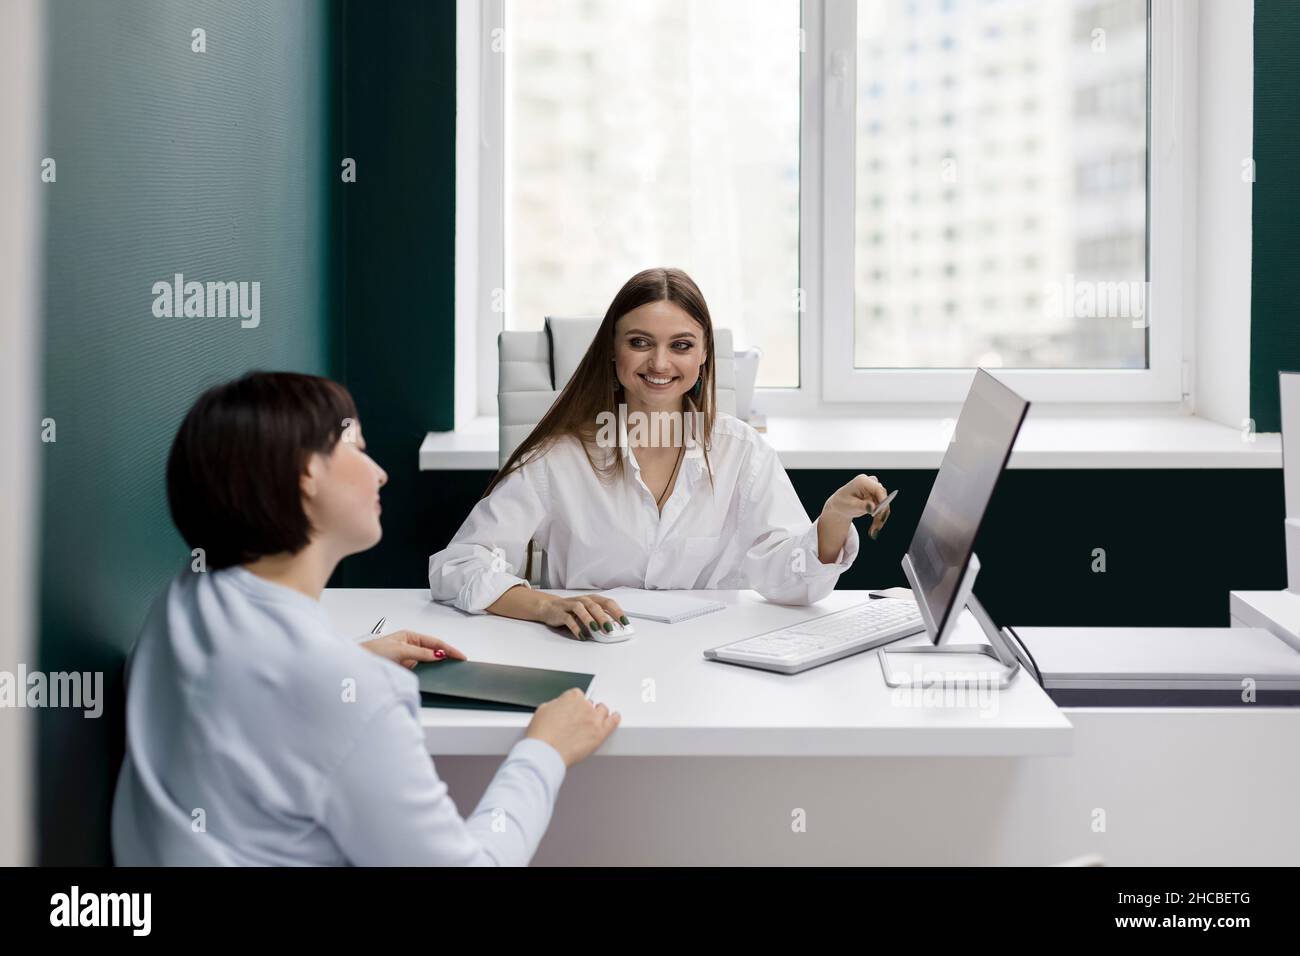 Smiling saleswoman gesturing looking at client in office Stock Photo